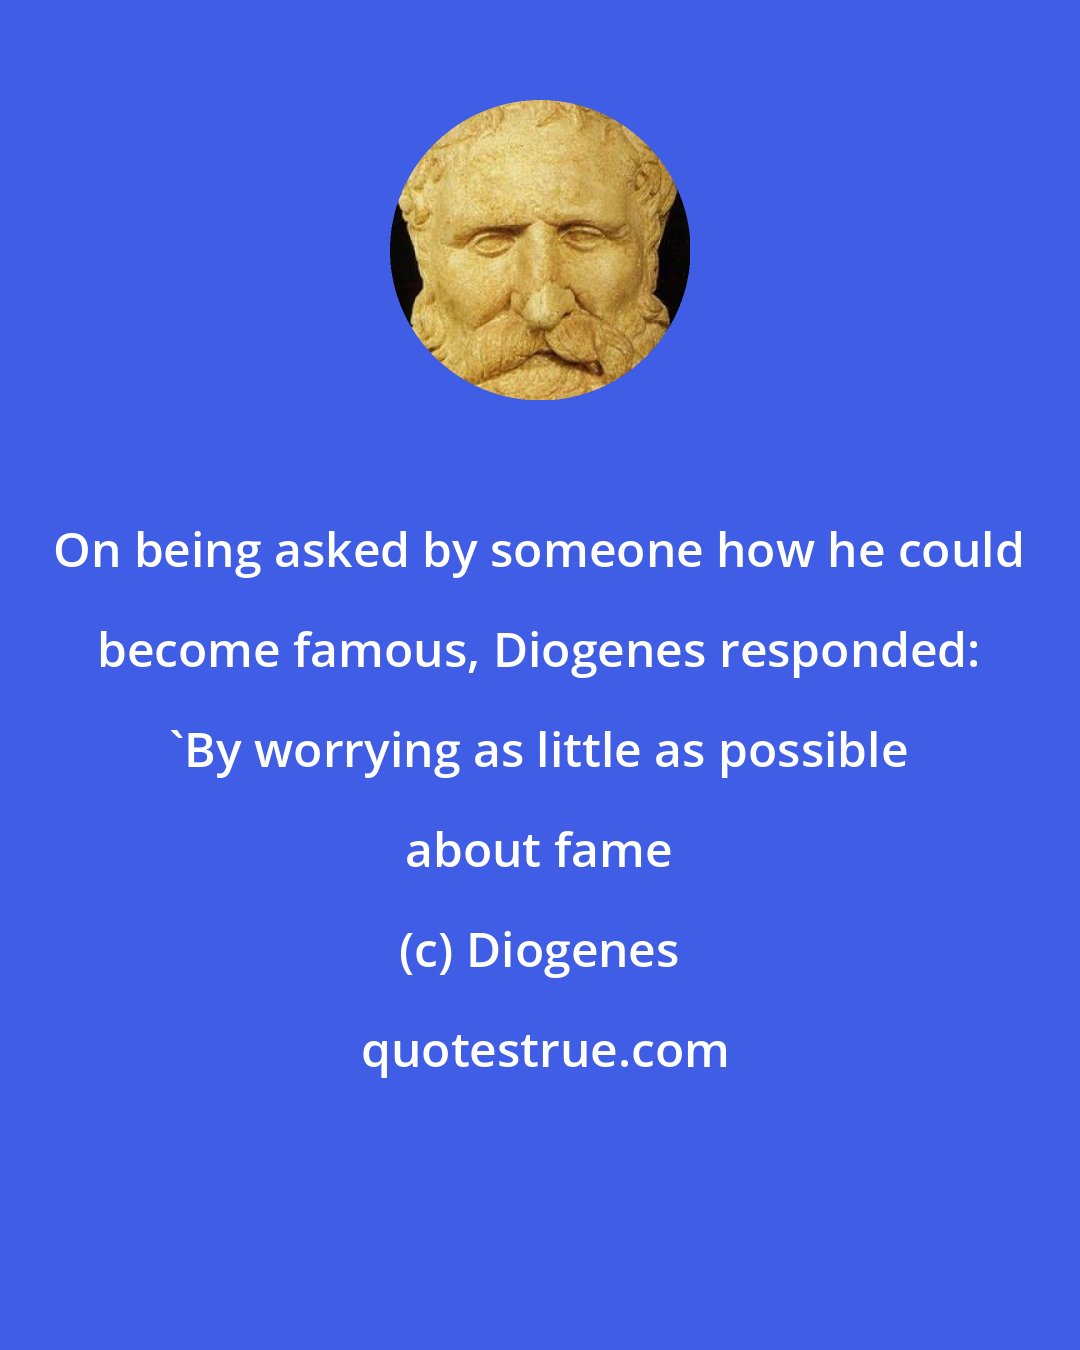 Diogenes: On being asked by someone how he could become famous, Diogenes responded: 'By worrying as little as possible about fame